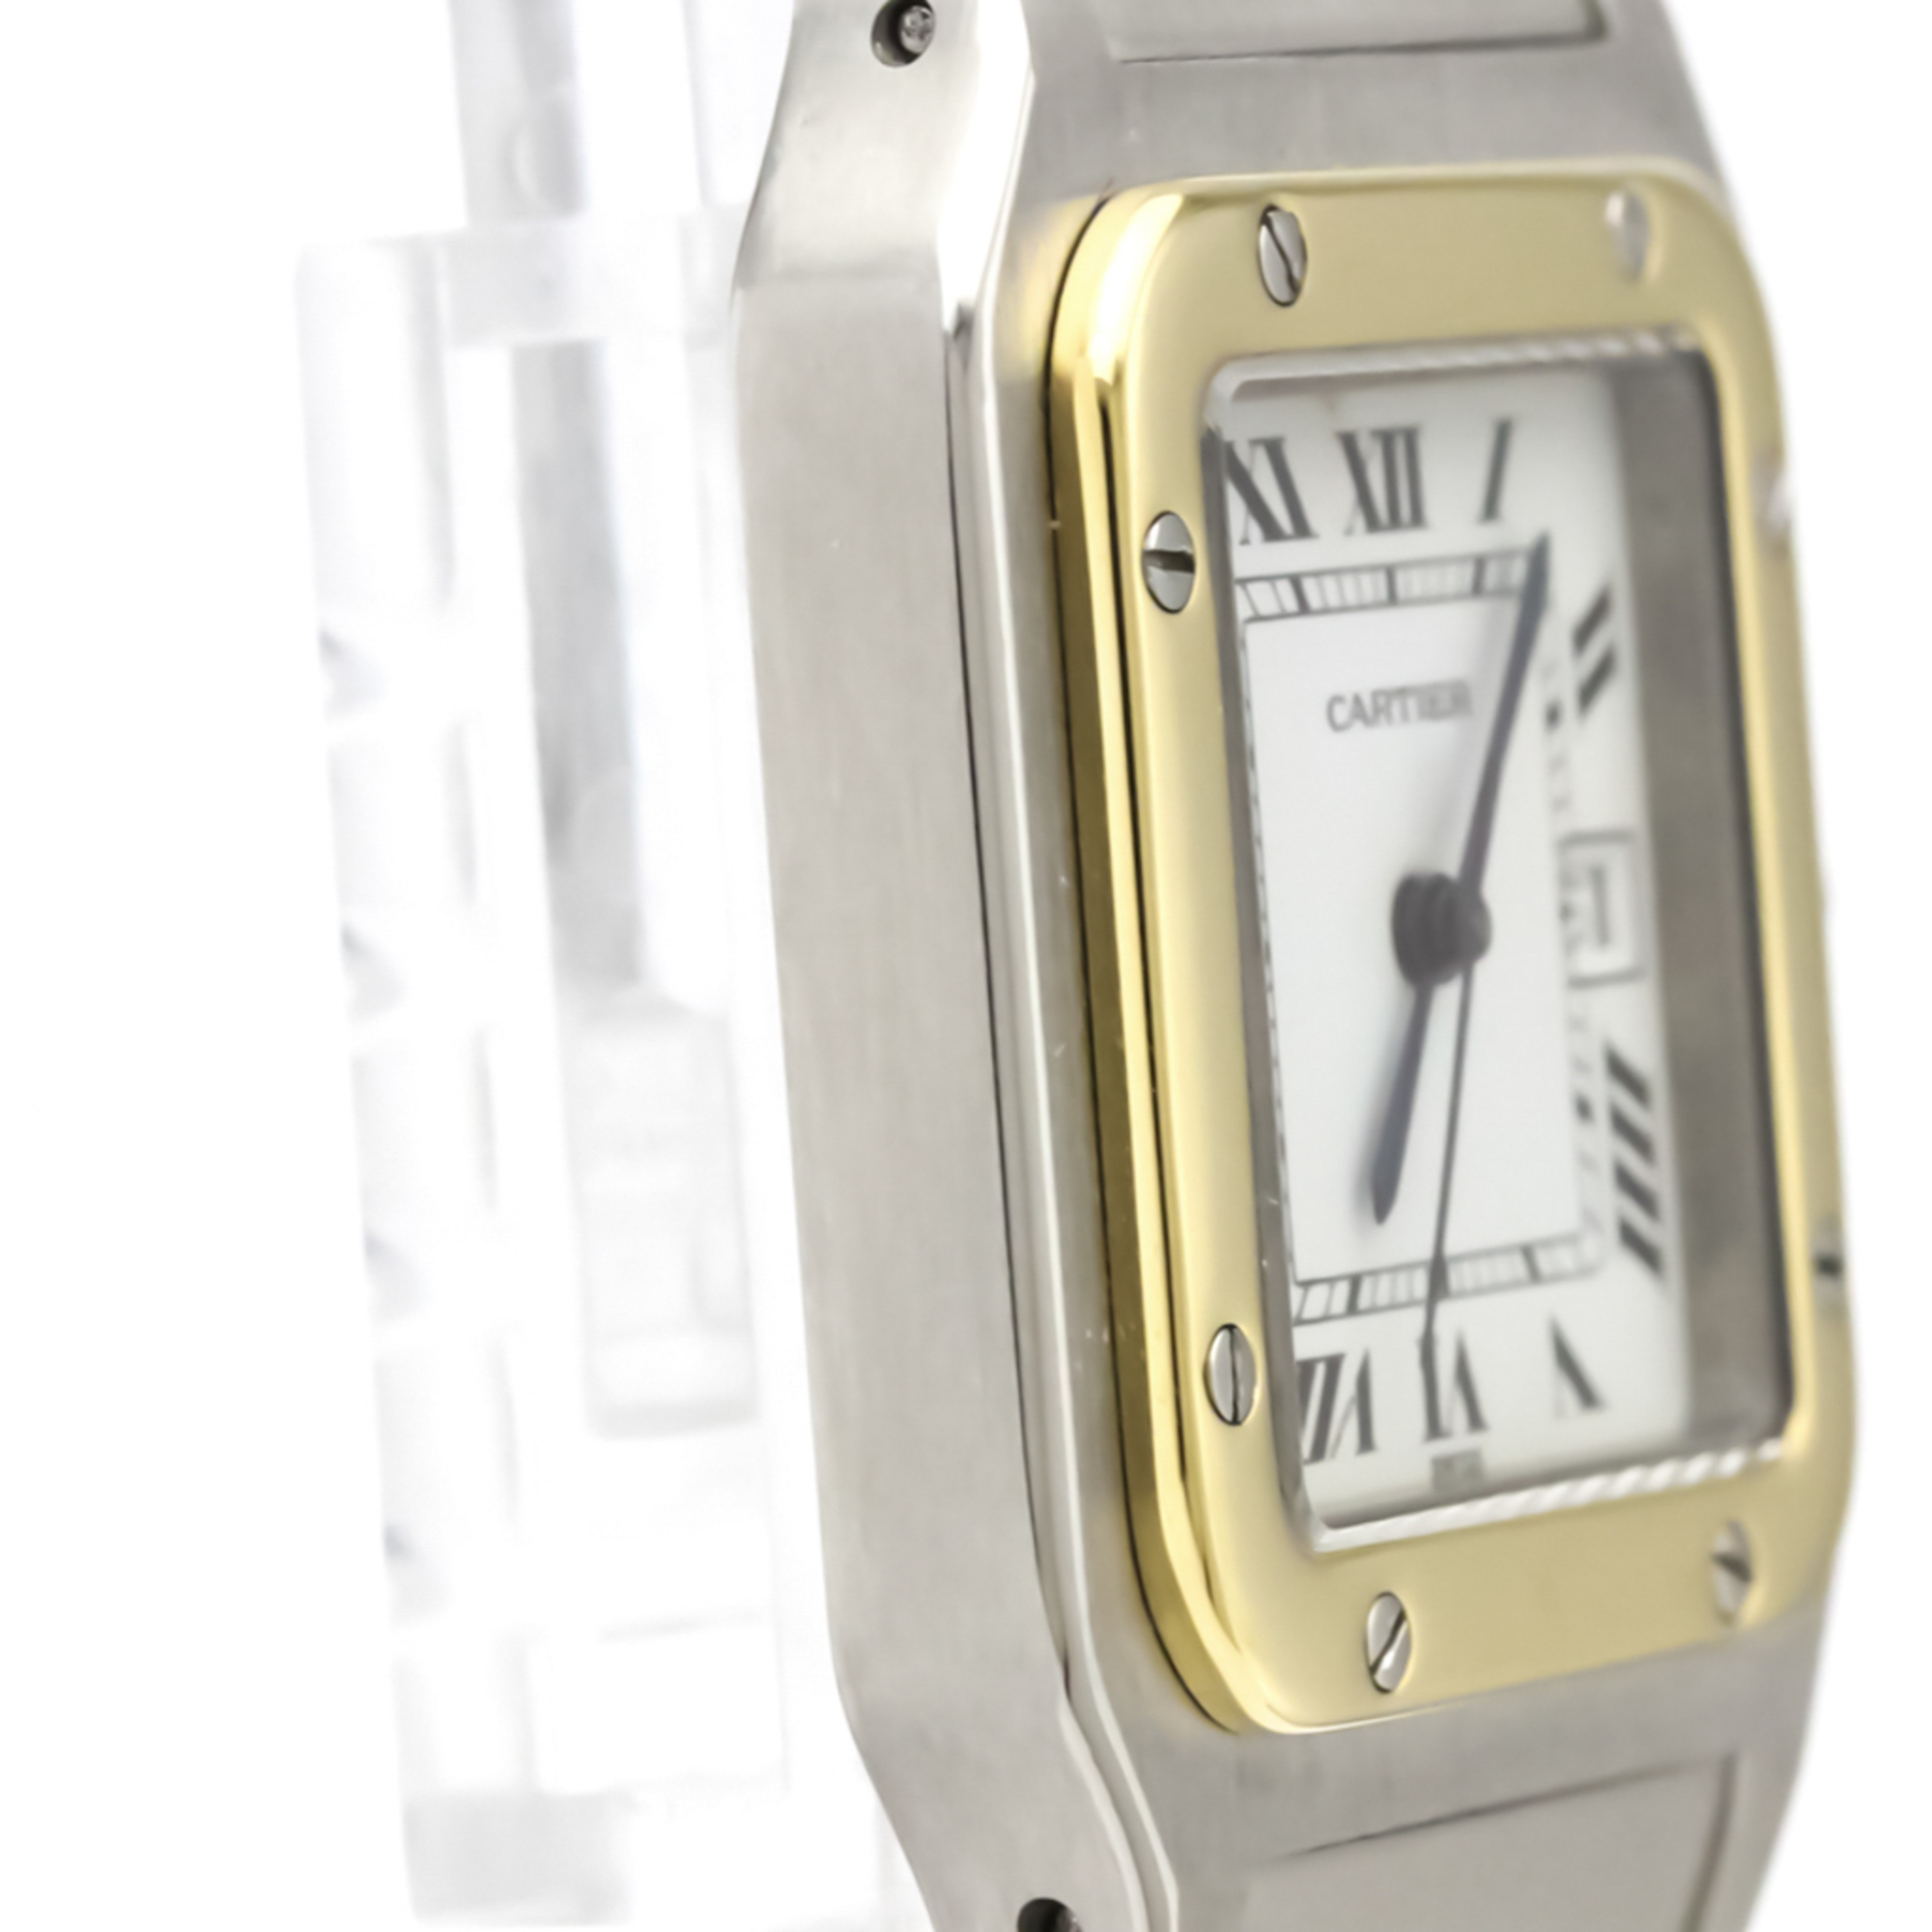 Cartier Santos Galbee Automatic Stainless Steel,Yellow Gold (18K) Men's Dress Watch -